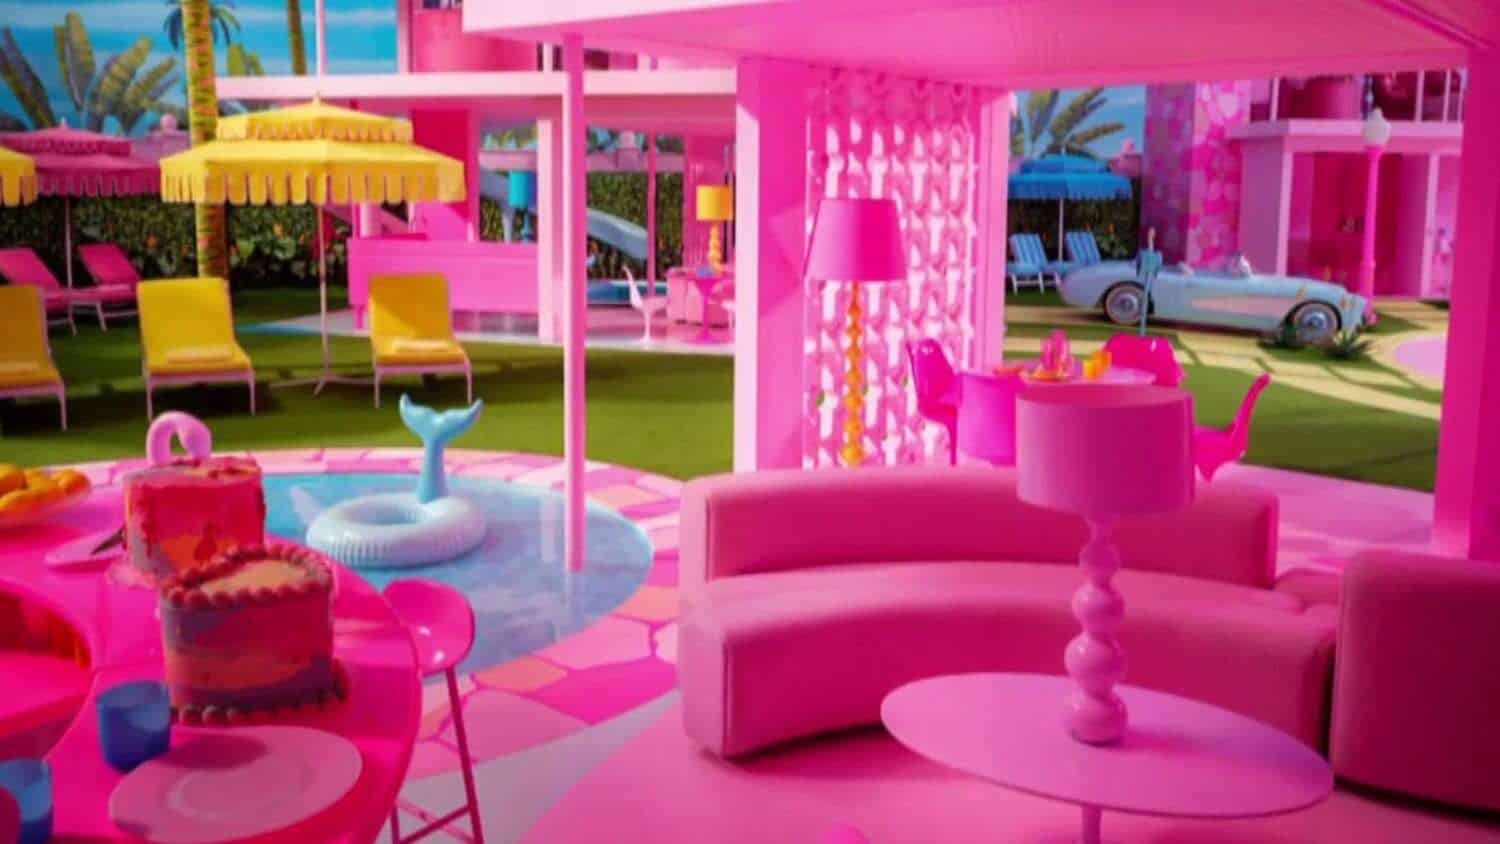 Who is the host of hgtv barbie dream house?